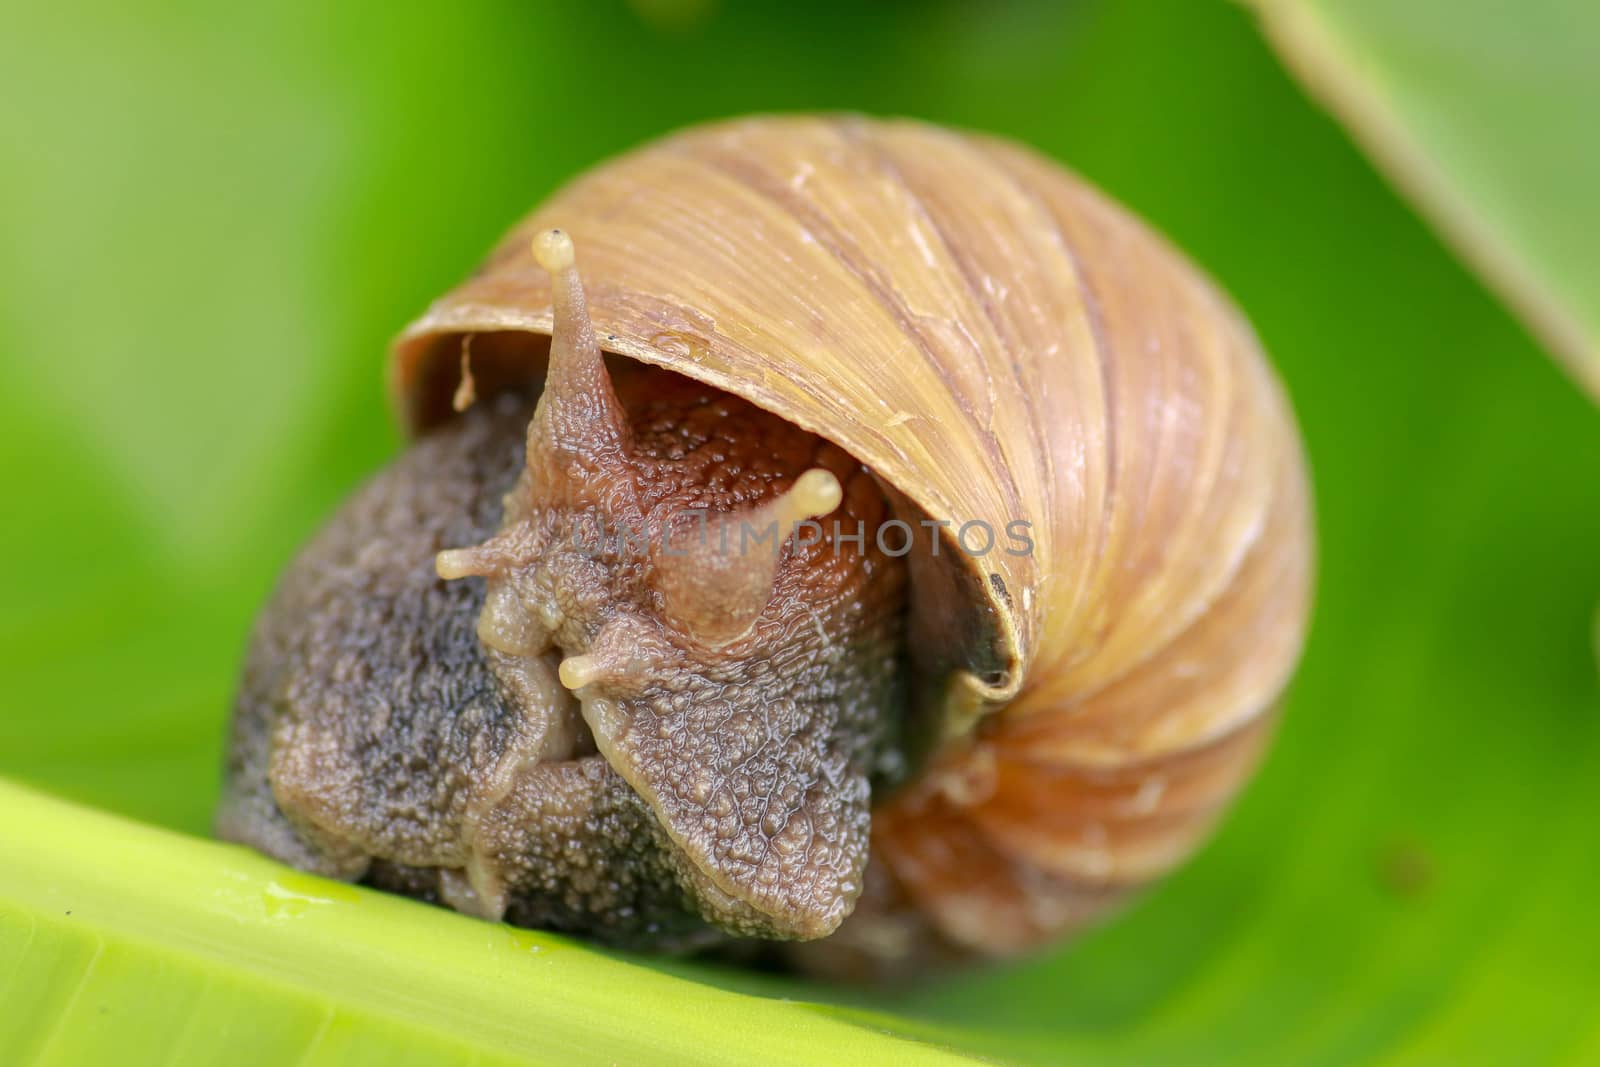 Macro of eye snail. Achatina Fulica looks into the camera lens. Close up of a large adult snail crawling on a banana leaf in a tropical rainforest by Sanatana2008